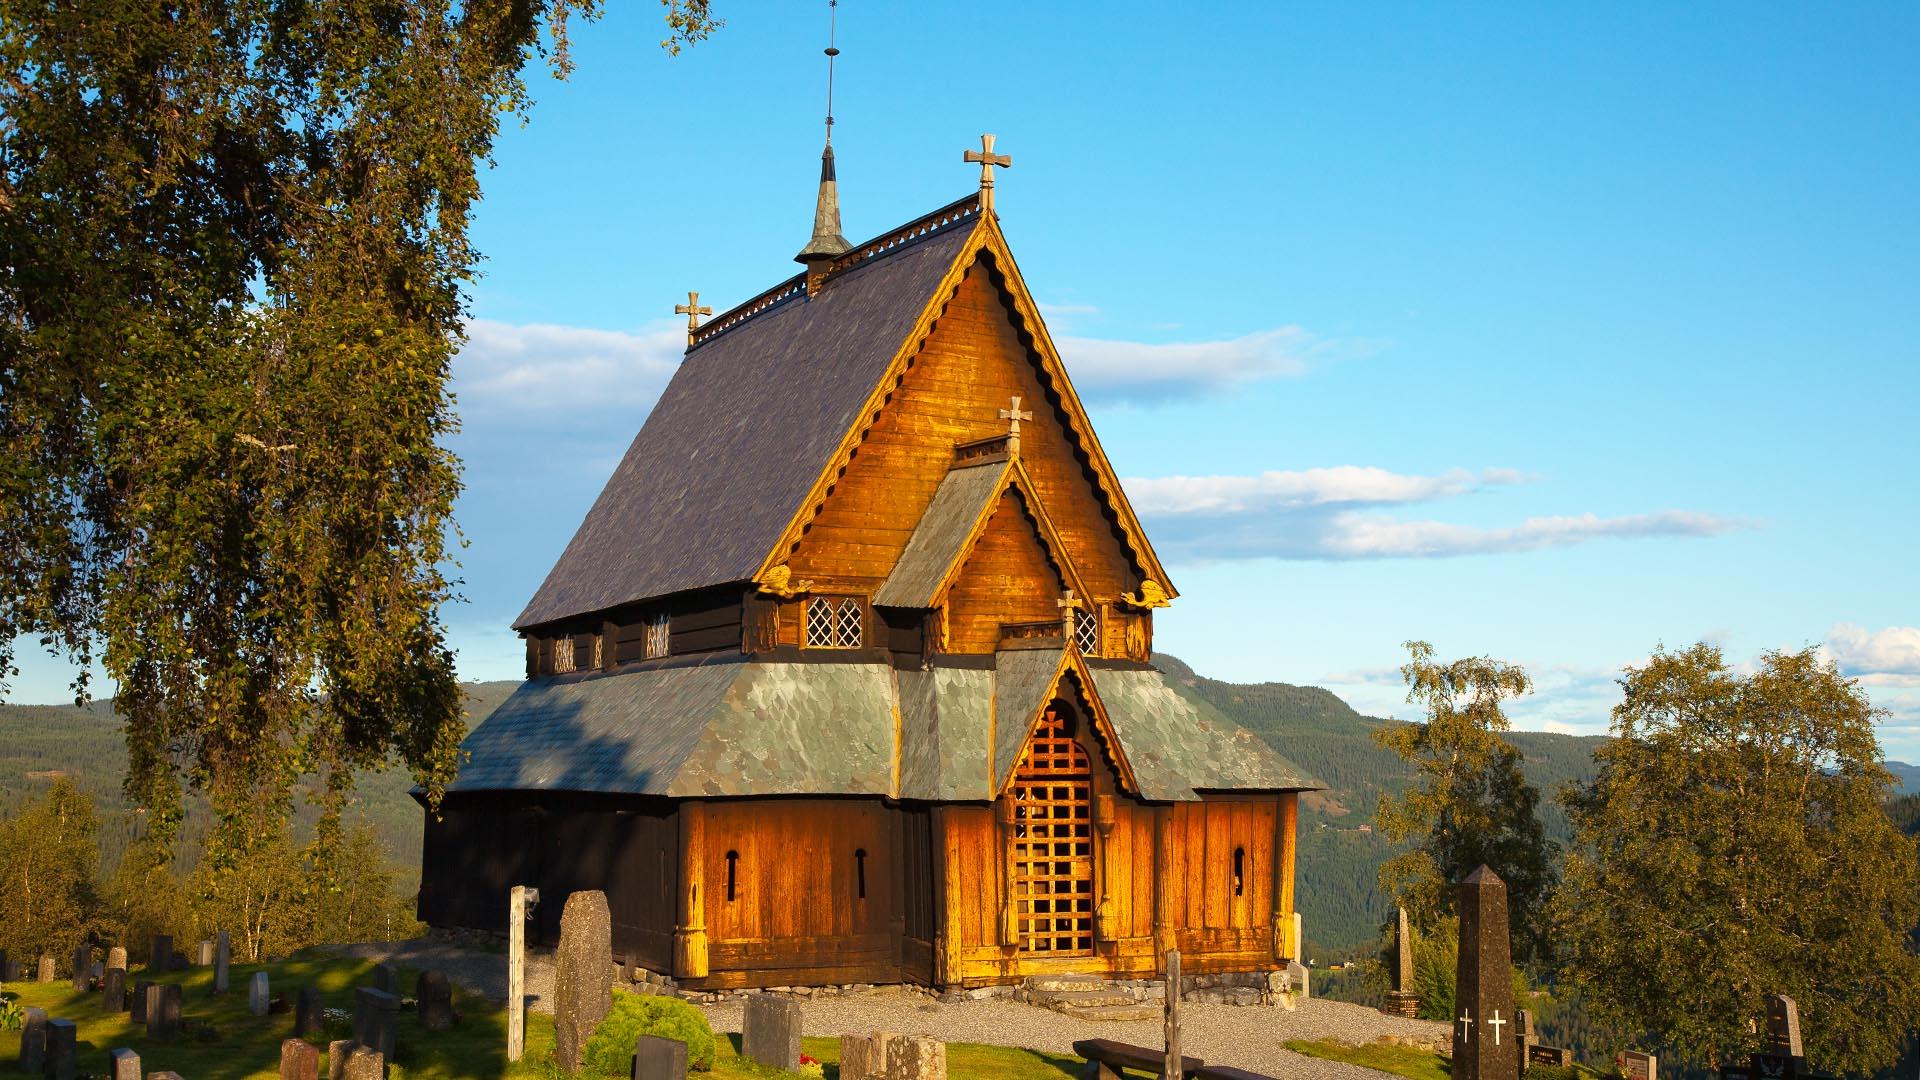 A stave church in warm evening light with birches nearby. Summer.